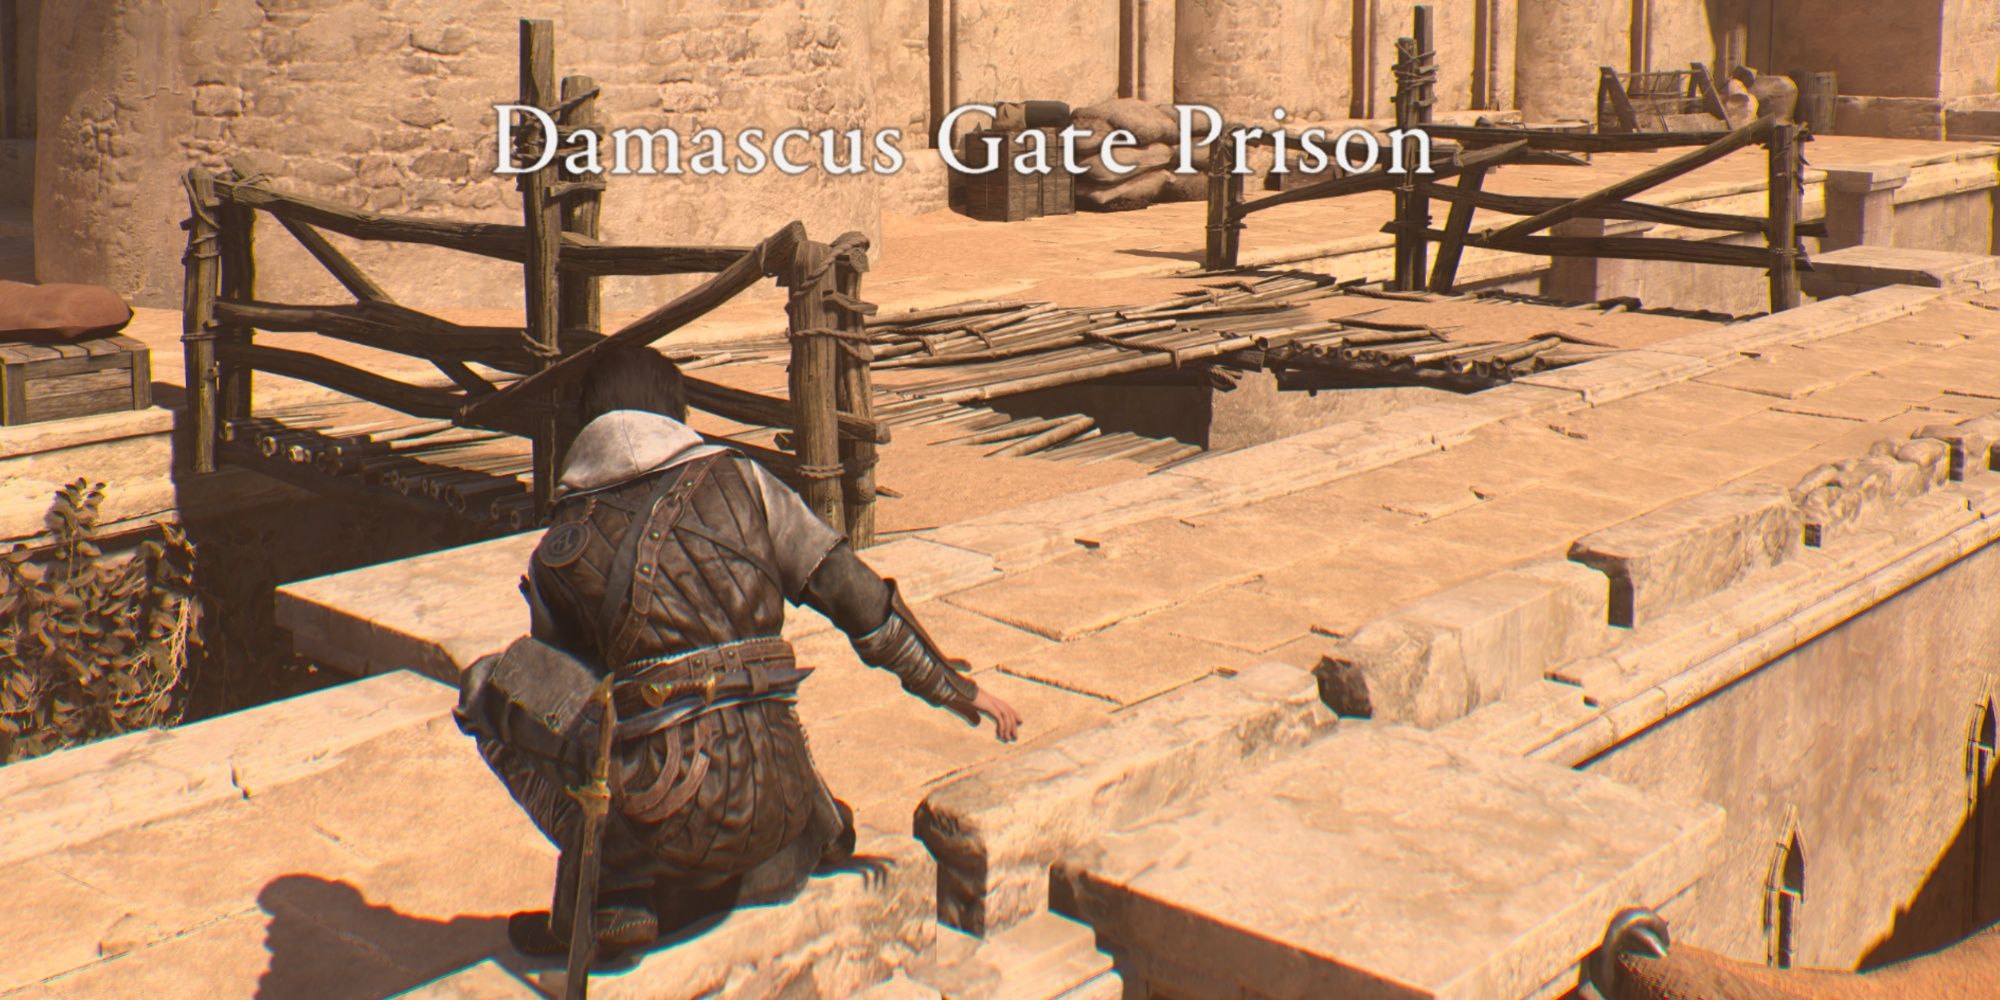 entering damascus gate prison in assassin's creed mirage